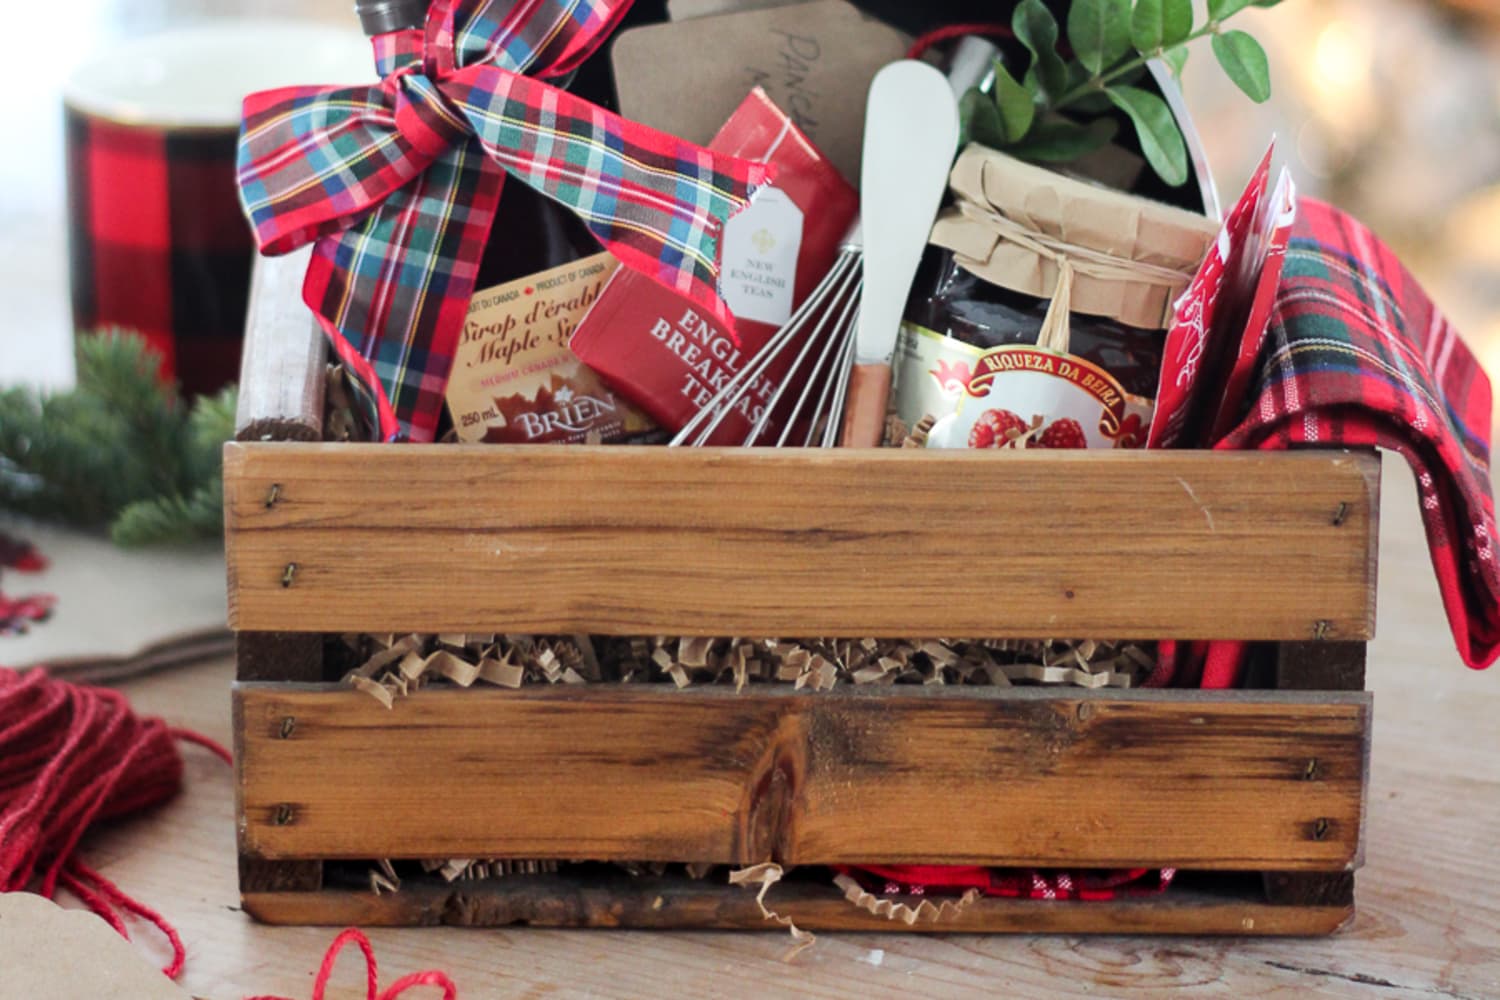 Pt. 2 Of the holiday gift basket ideas, this one is a cheaper